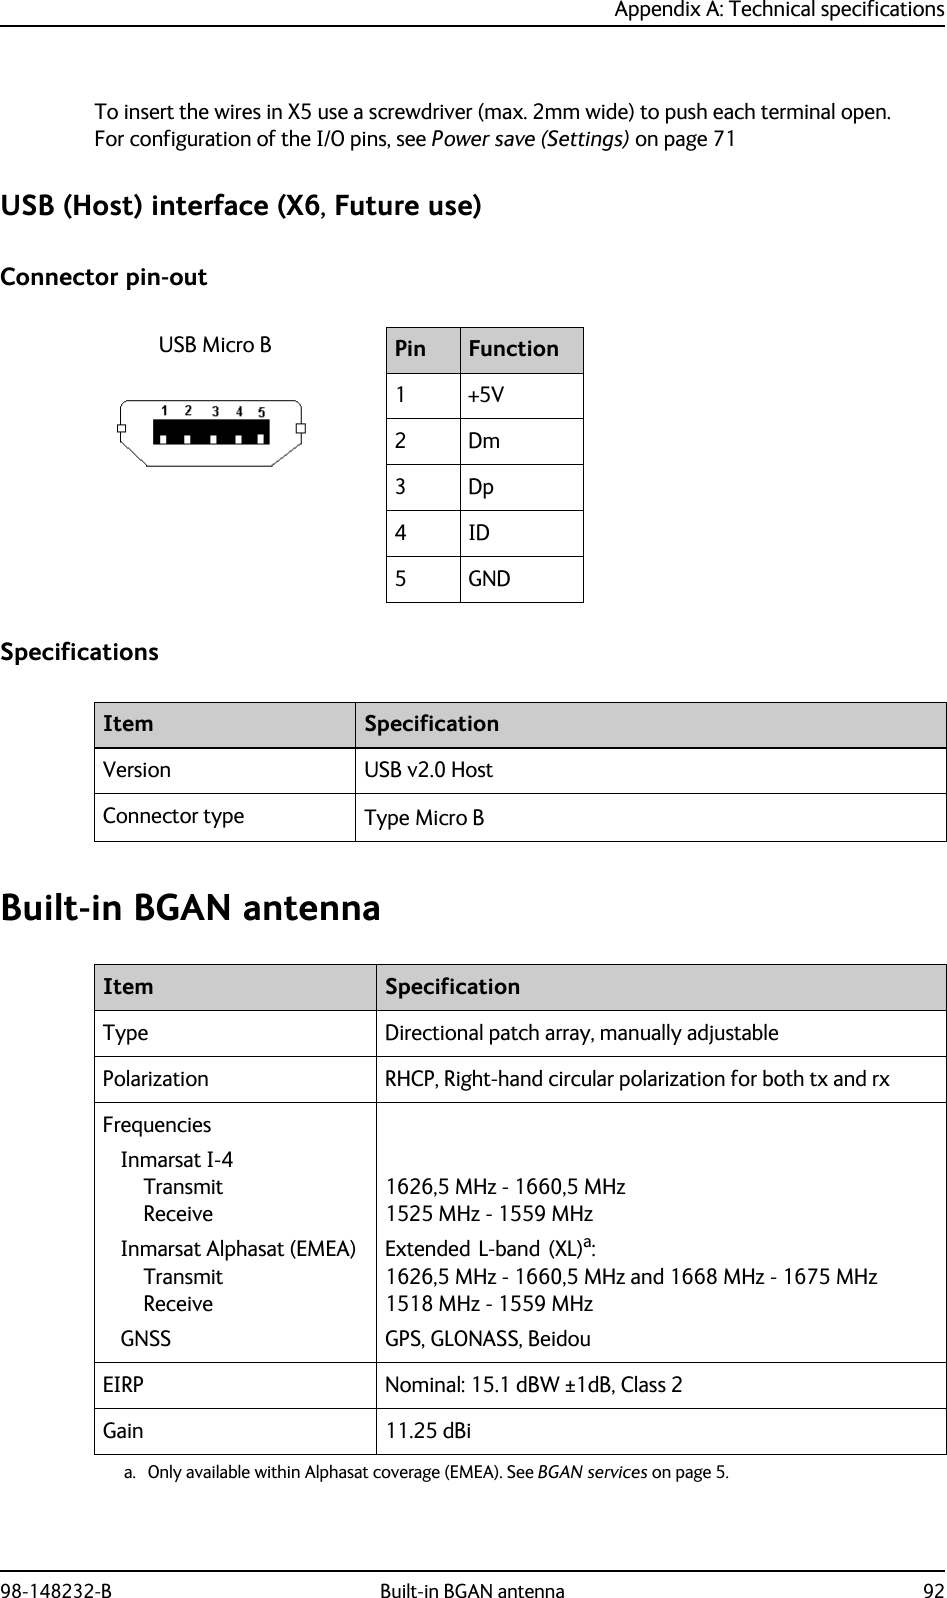 Appendix A: Technical specifications98-148232-B Built-in BGAN antenna 92To insert the wires in X5 use a screwdriver (max. 2mm wide) to push each terminal open. For configuration of the I/O pins, see Power save (Settings) on page 71USB (Host) interface (X6, Future use)Connector pin-outSpecificationsBuilt-in BGAN antennaPin Function1+5V2Dm3Dp4ID5GNDUSB Micro BItem SpecificationVersion USB v2.0 HostConnector type Type Micro BItem SpecificationType Directional patch array, manually adjustablePolarization RHCP, Right-hand circular polarization for both tx and rxFrequenciesInmarsat I-4 Transmit ReceiveInmarsat Alphasat (EMEA) Transmit ReceiveGNSS1626,5 MHz - 1660,5 MHz 1525 MHz - 1559 MHzExtended L-band (XL)a:1626,5 MHz - 1660,5 MHz and 1668 MHz - 1675 MHz 1518 MHz - 1559 MHzGPS, GLONASS, Beidou a. Only available within Alphasat coverage (EMEA). See BGAN services on page 5.EIRP Nominal: 15.1 dBW ±1dB, Class 2Gain 11.25 dBi